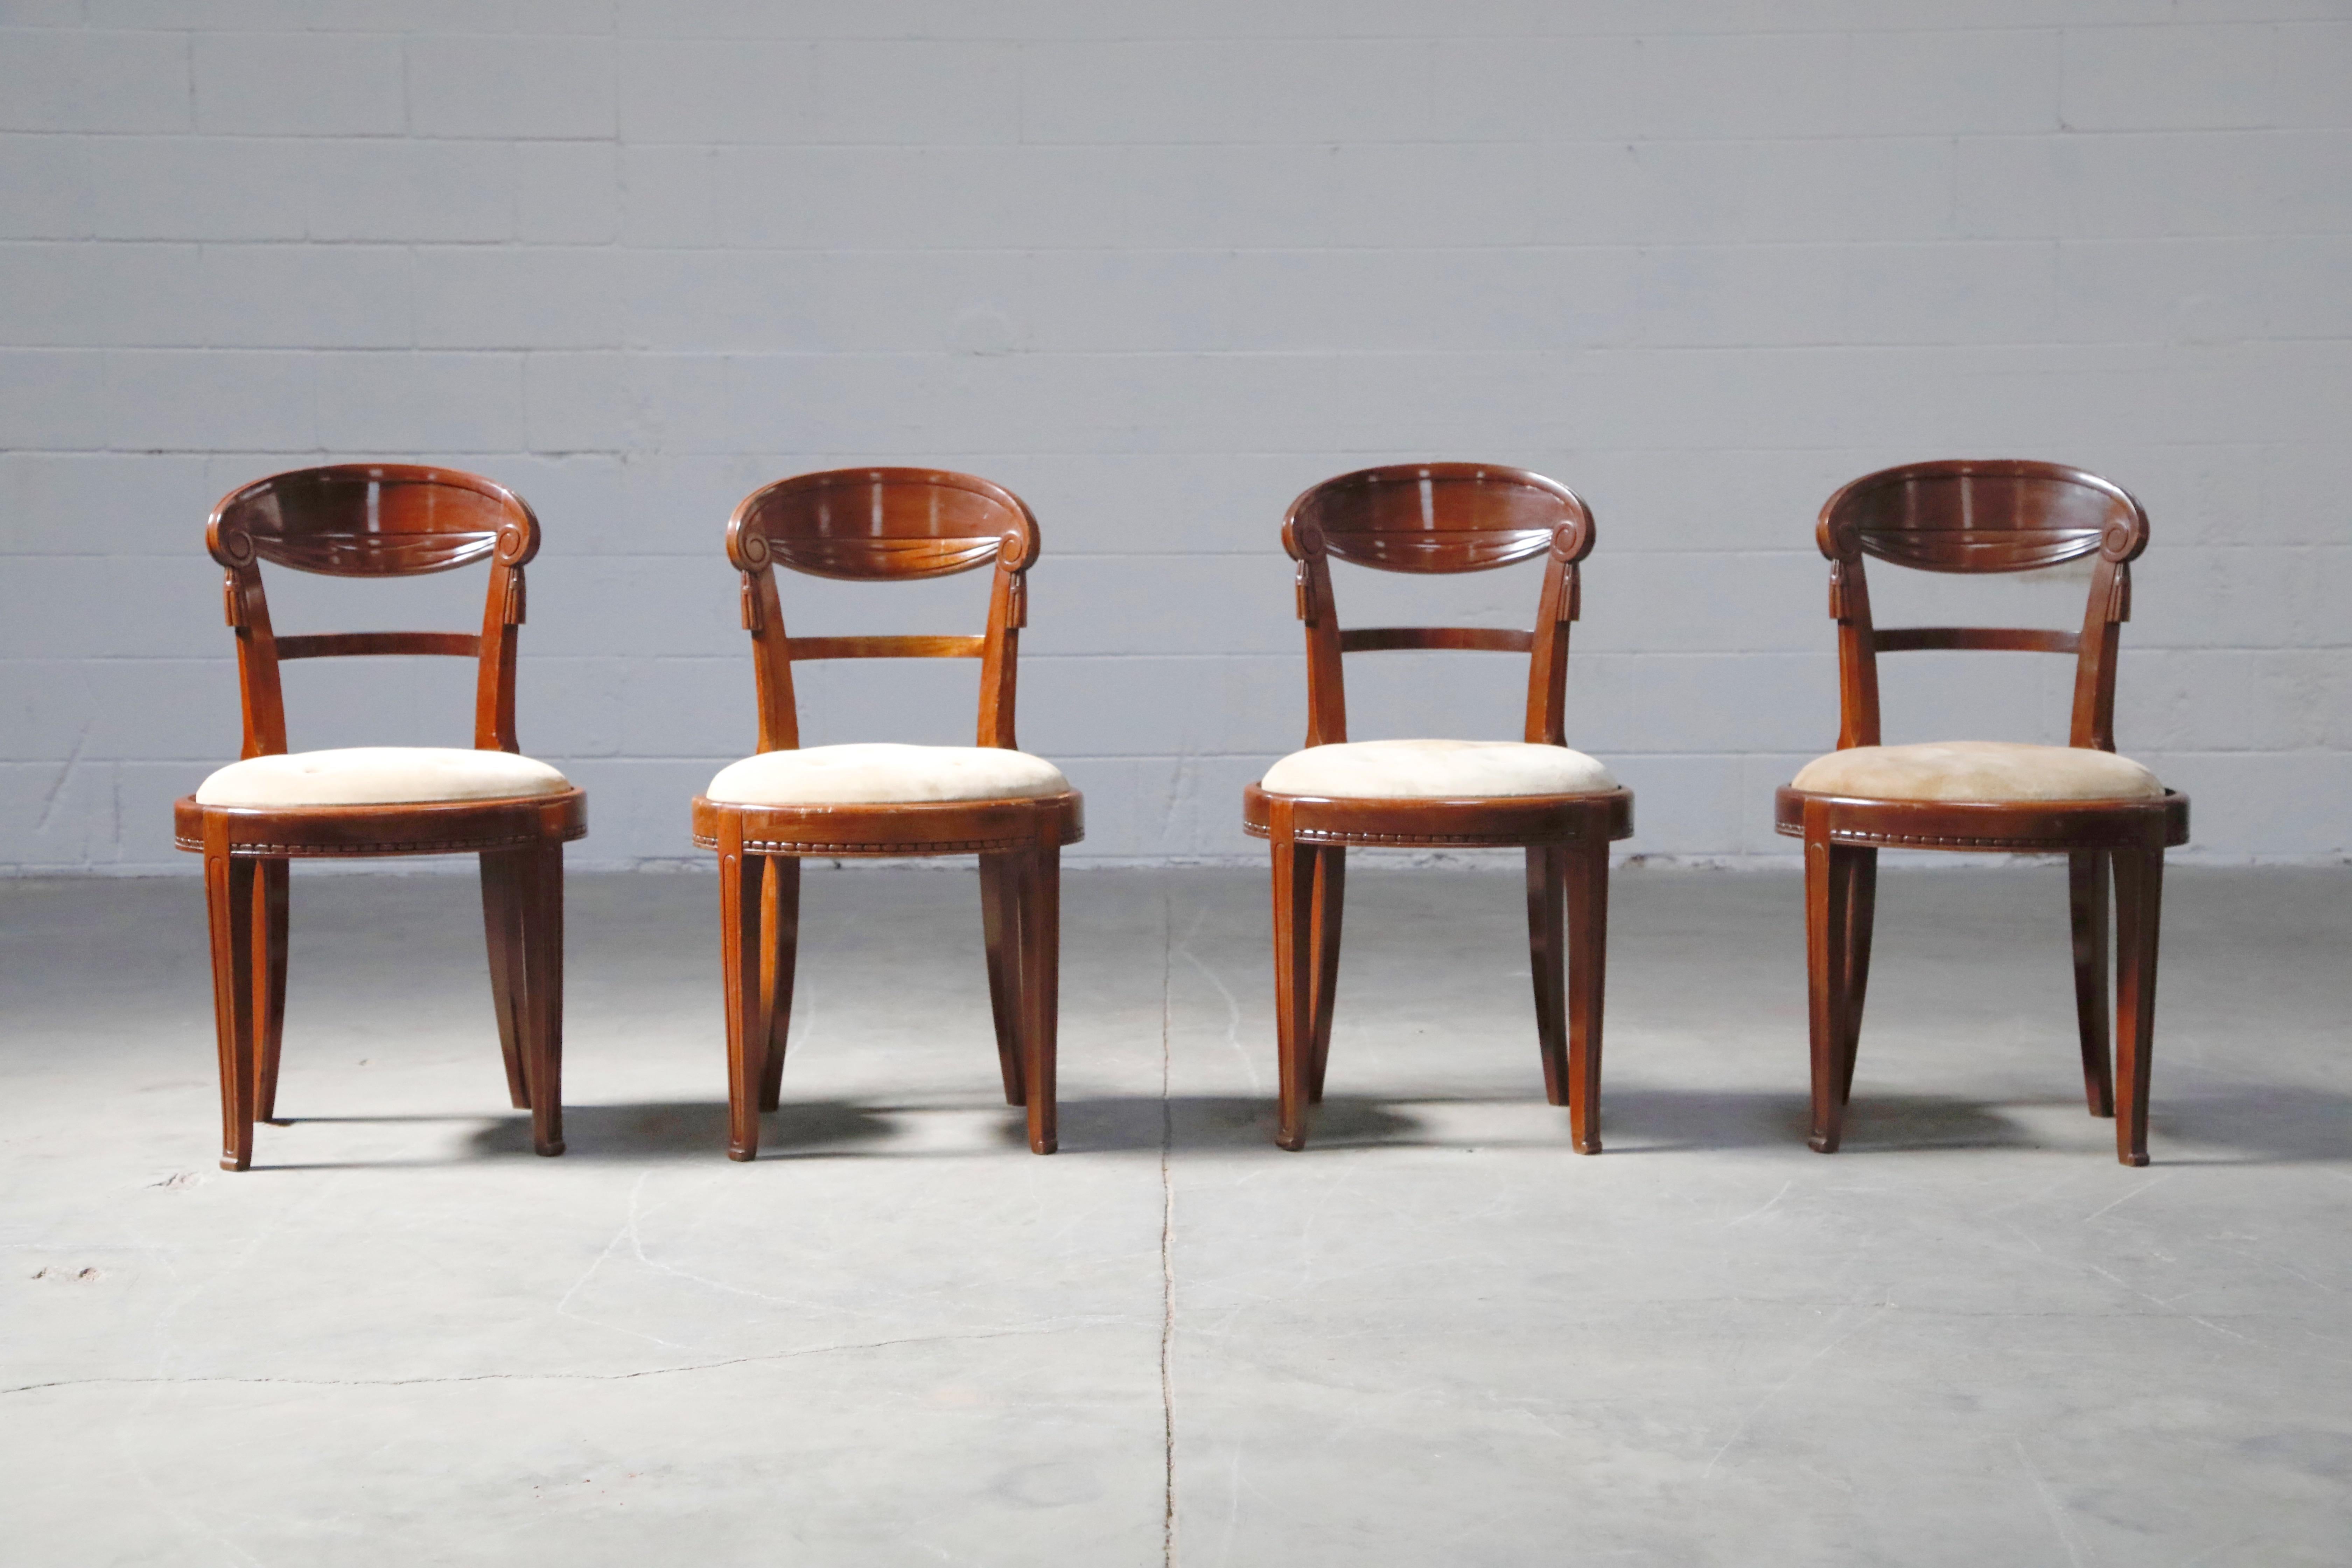 A superb suite of four French Art Deco Mahogany dining chairs with intricate wood detailing and suede upholstery, attributed to Sue et Mare, circa 1920s. 

The deep luxurious mahogany frames have curved seat backs with carved scroll ends and faux